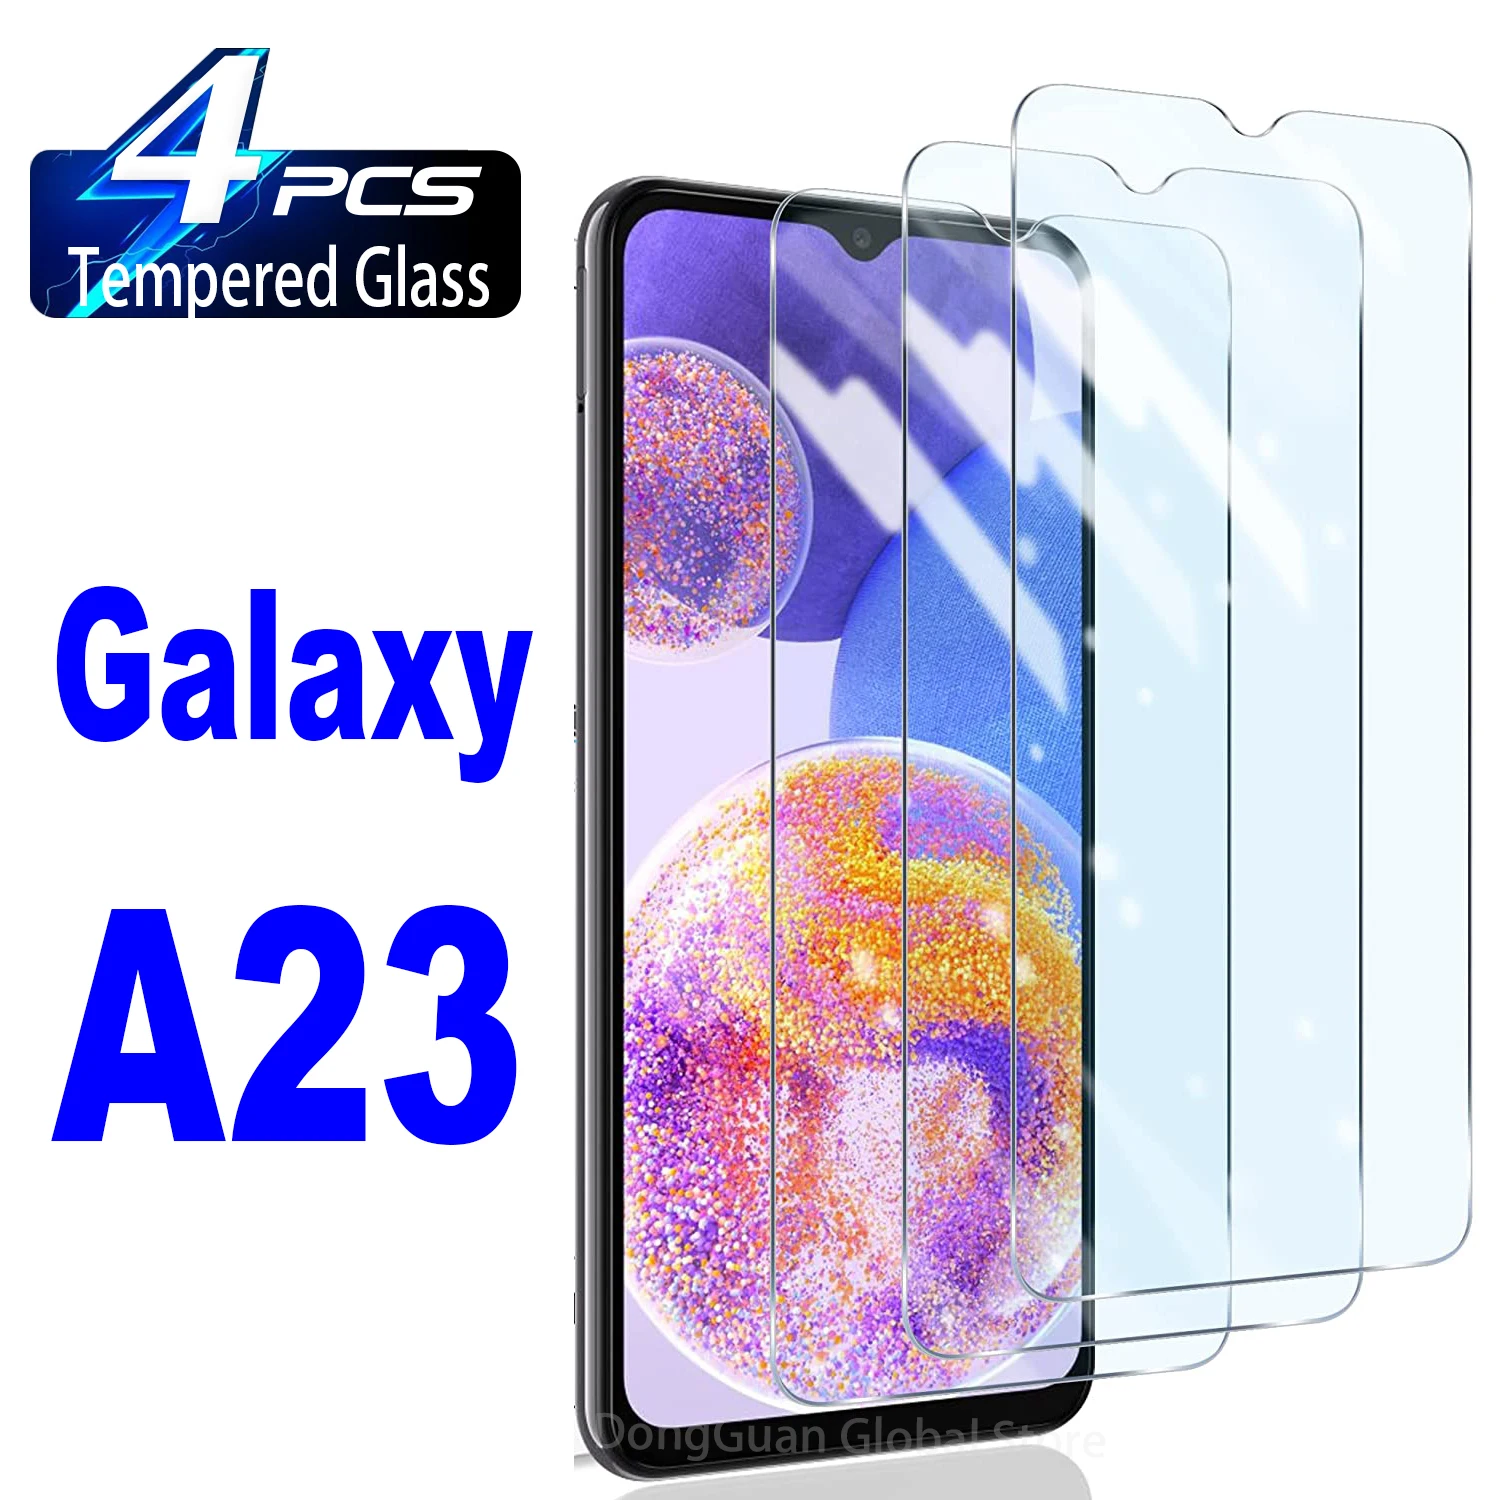 2-4pcs-high-auminum-tempered-glass-for-samsung-galaxy-a23-screen-protector-glass-film